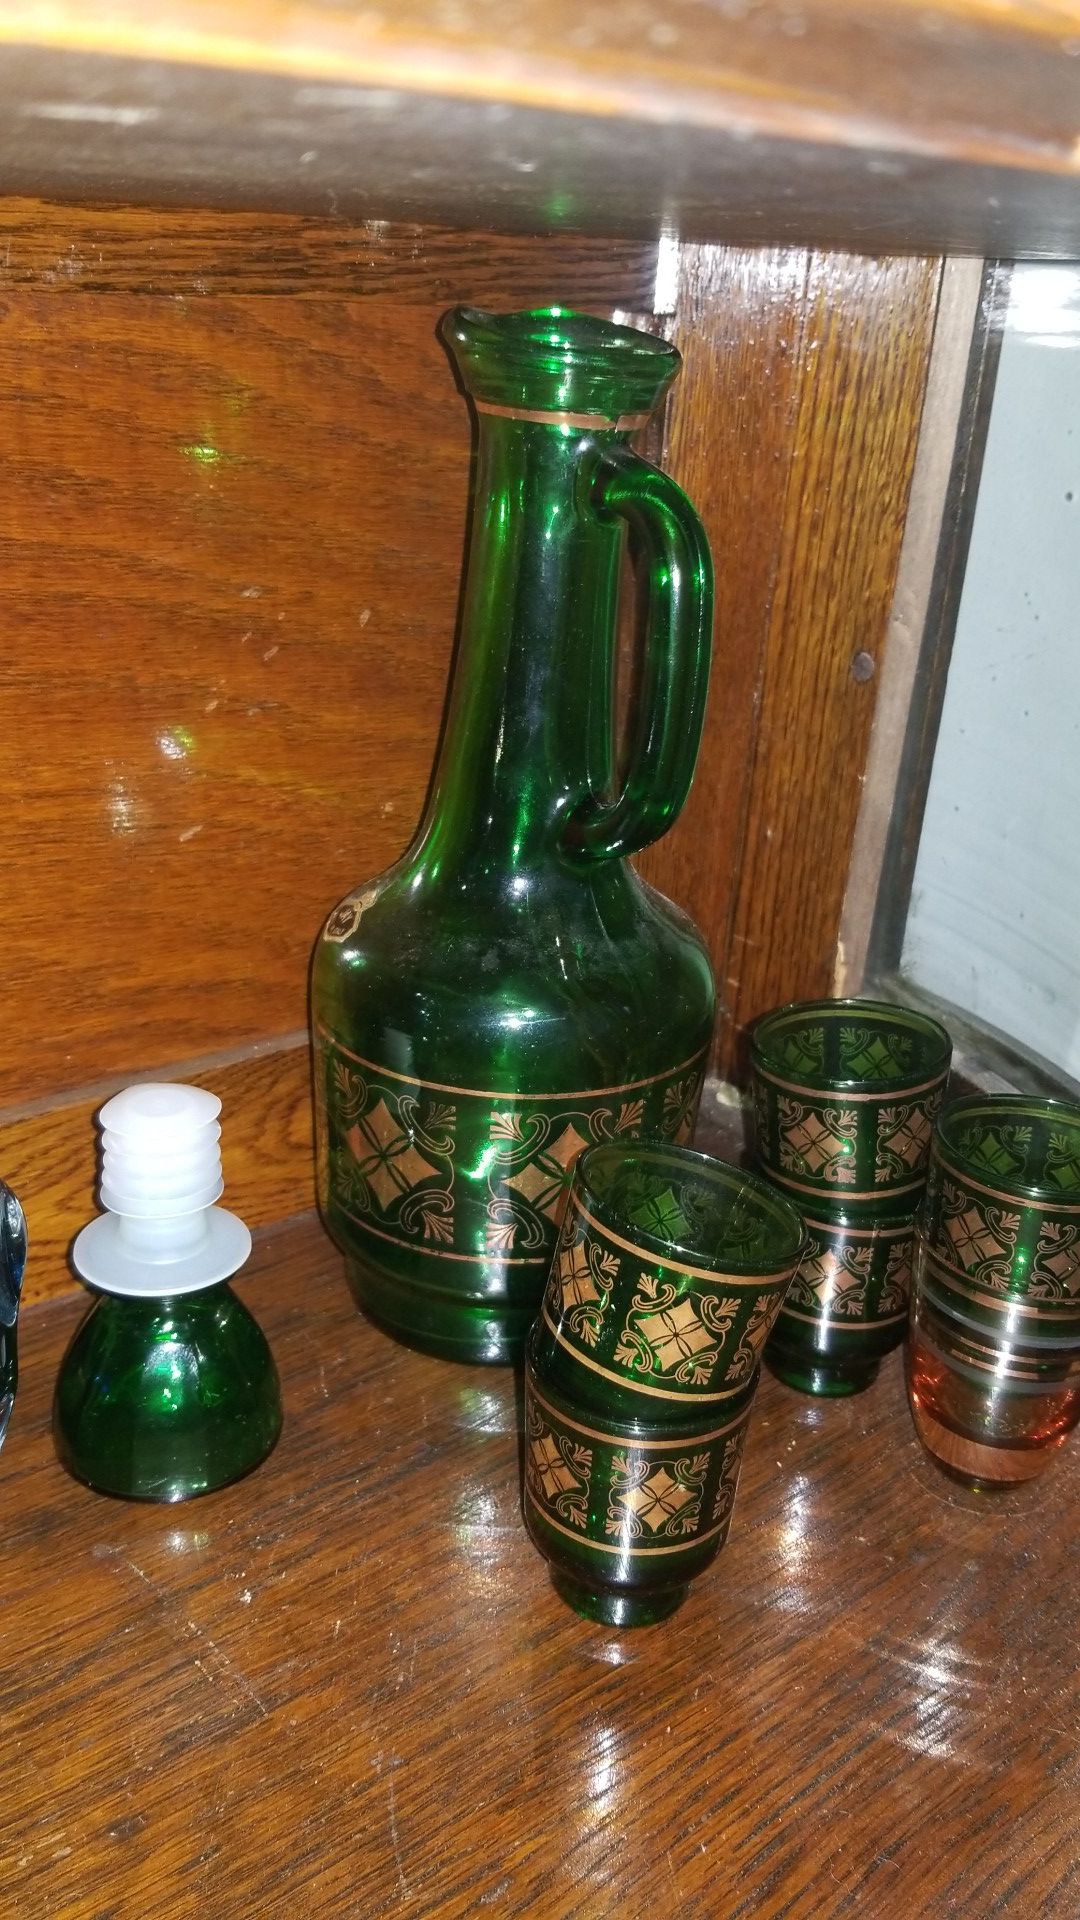 Sale today only! Antique Decanter w shot glasses